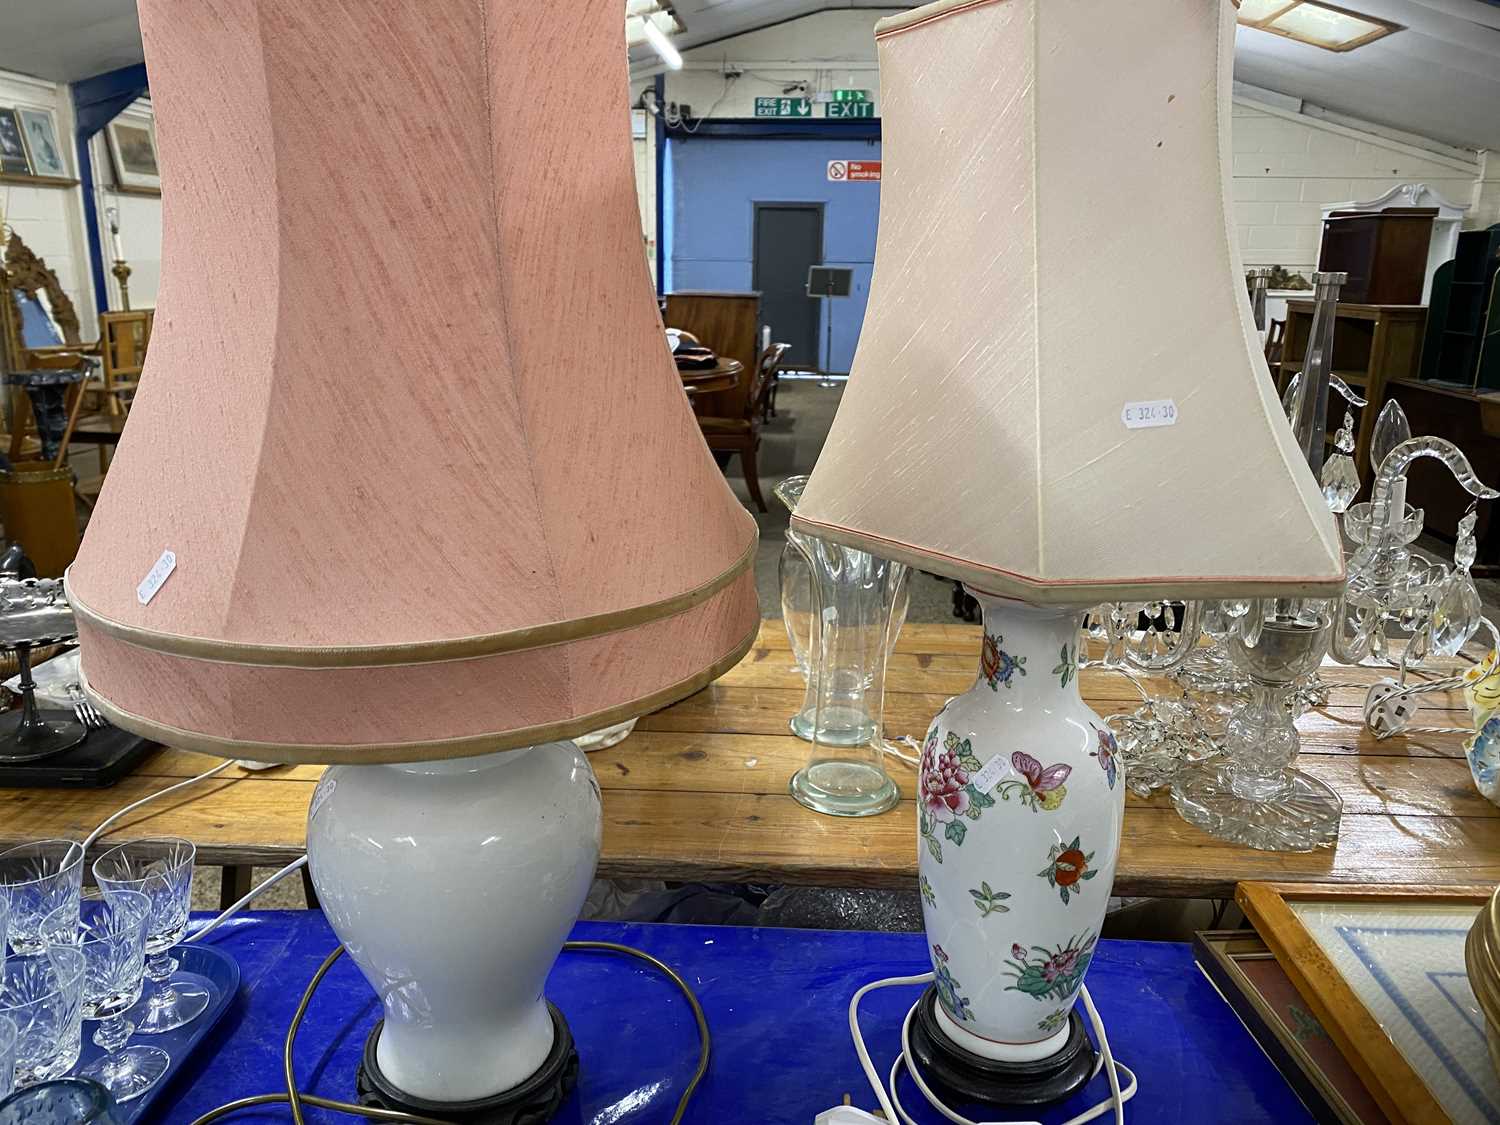 Two modern ceramic based table lamps